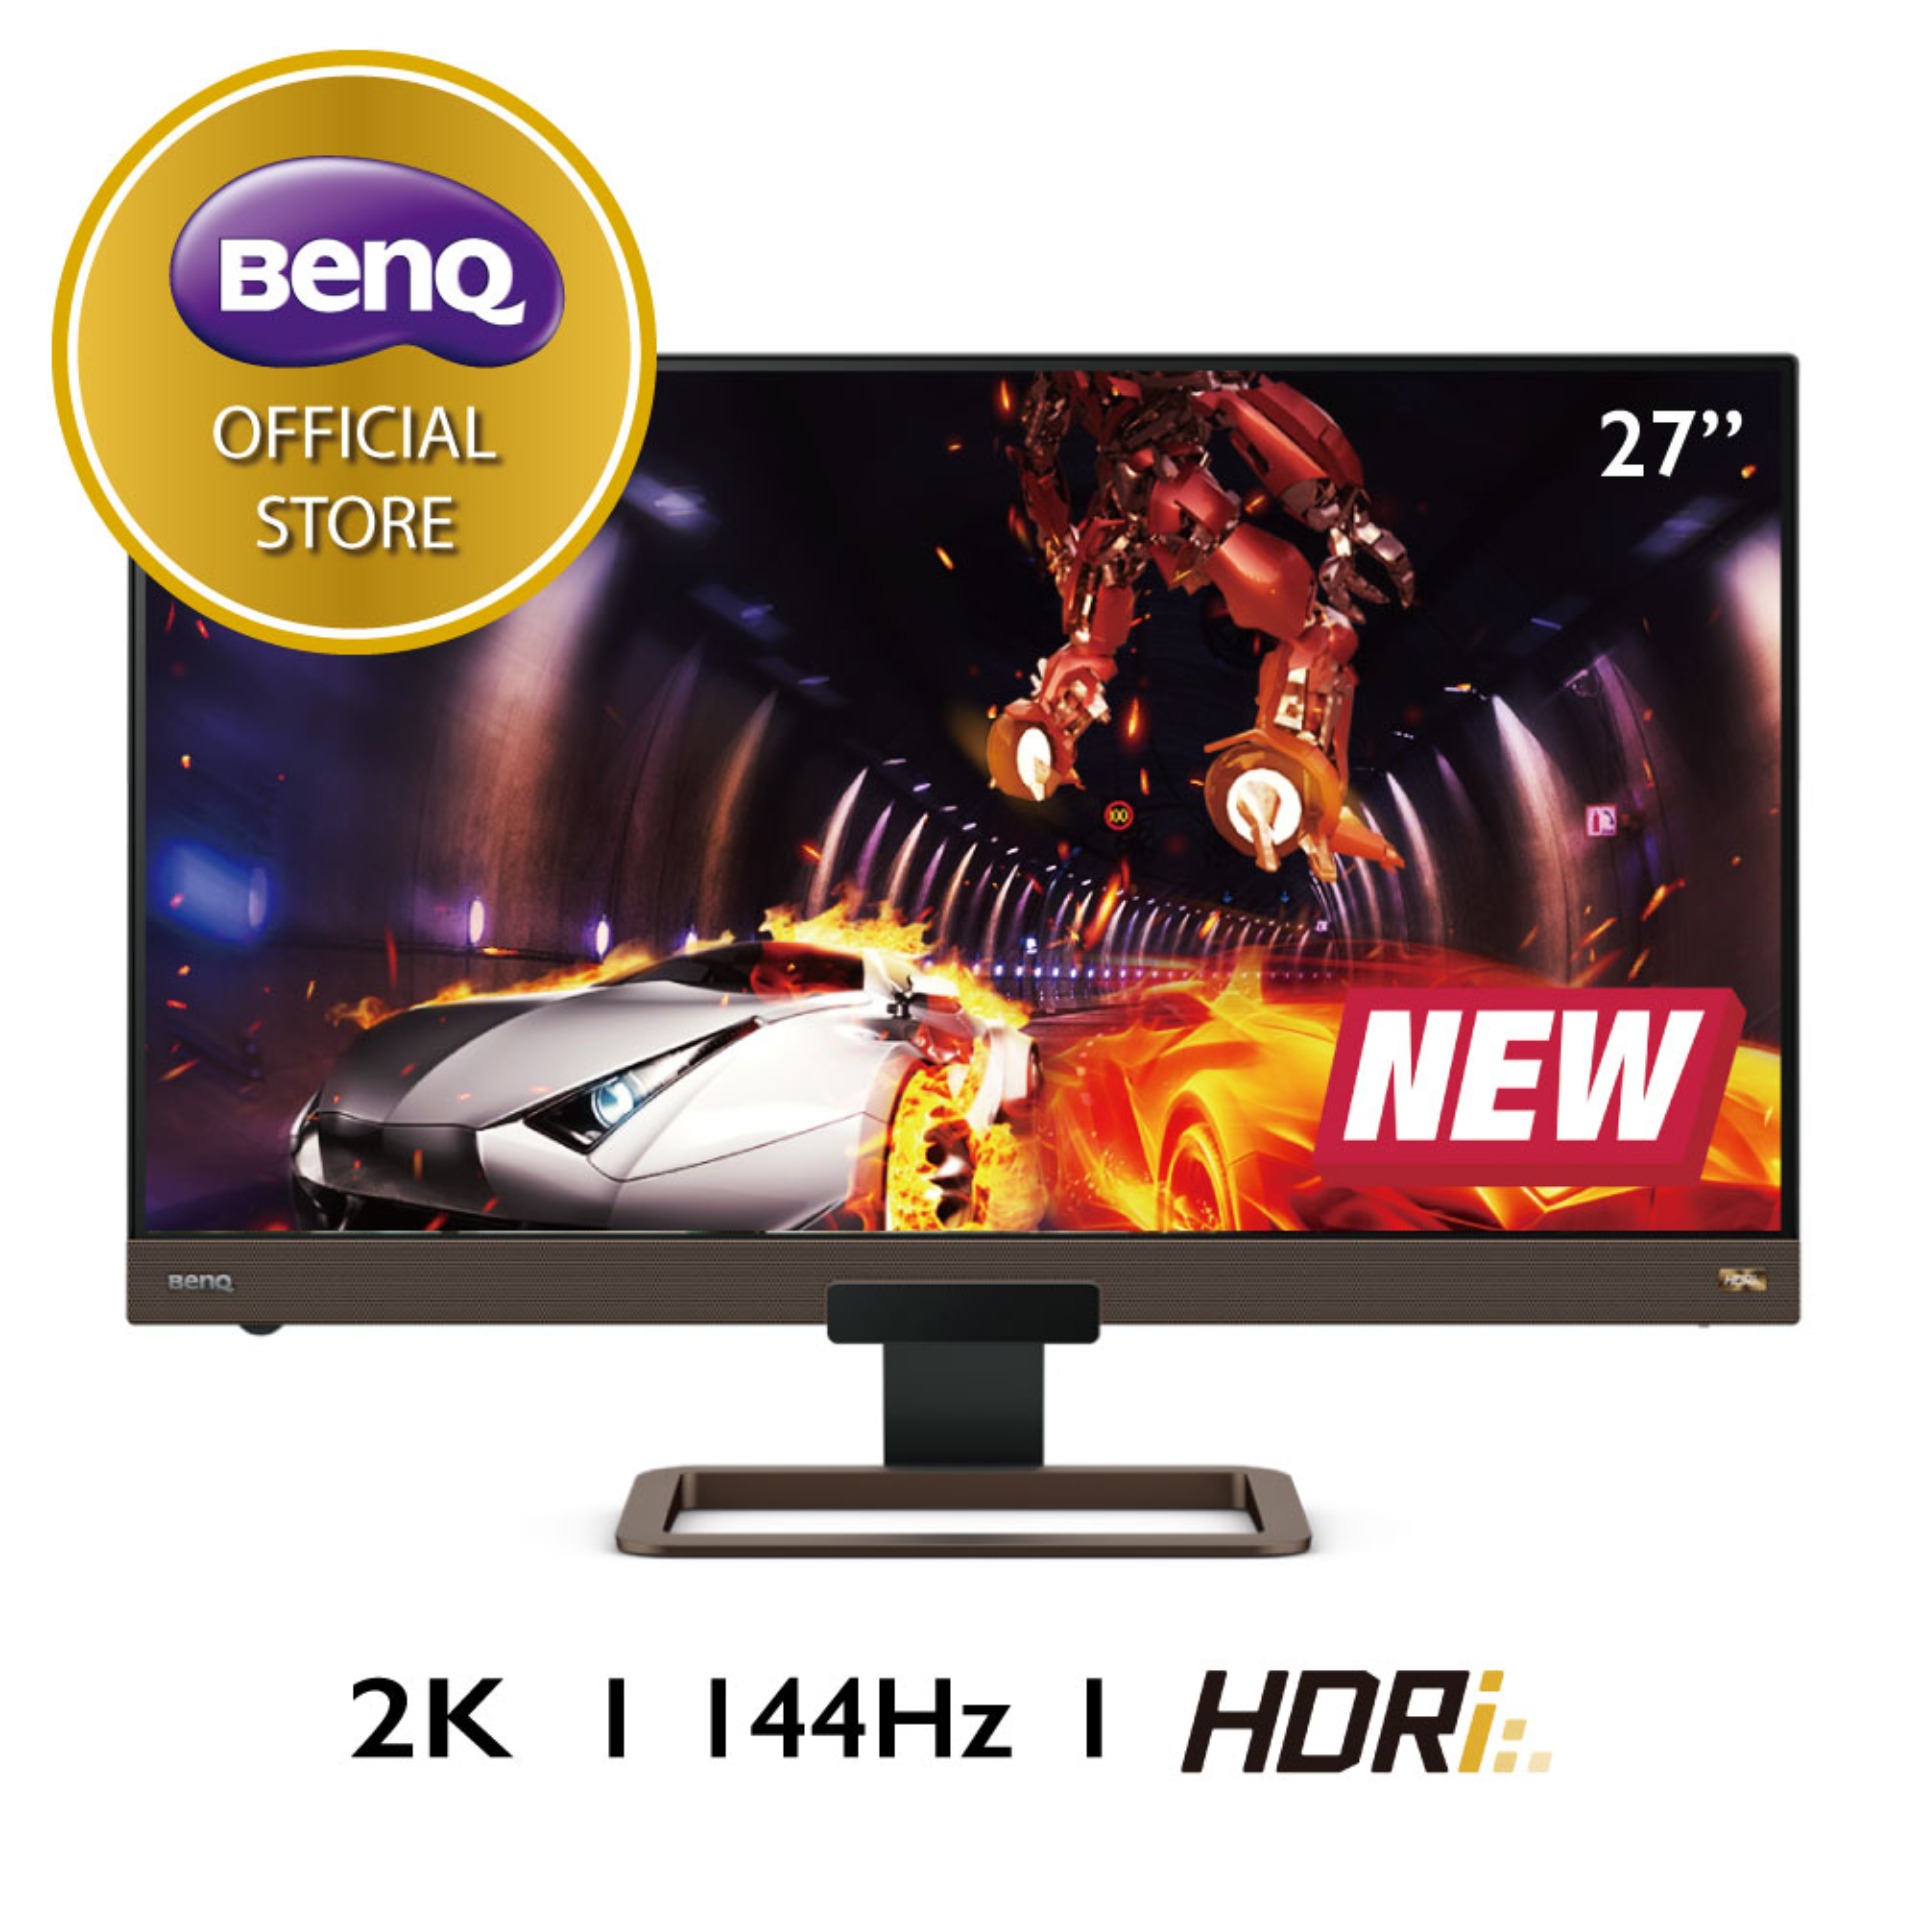 1080p Images Benq Stylish Monitor With 27 Inch 1080p Eye Care Technology Gw2780